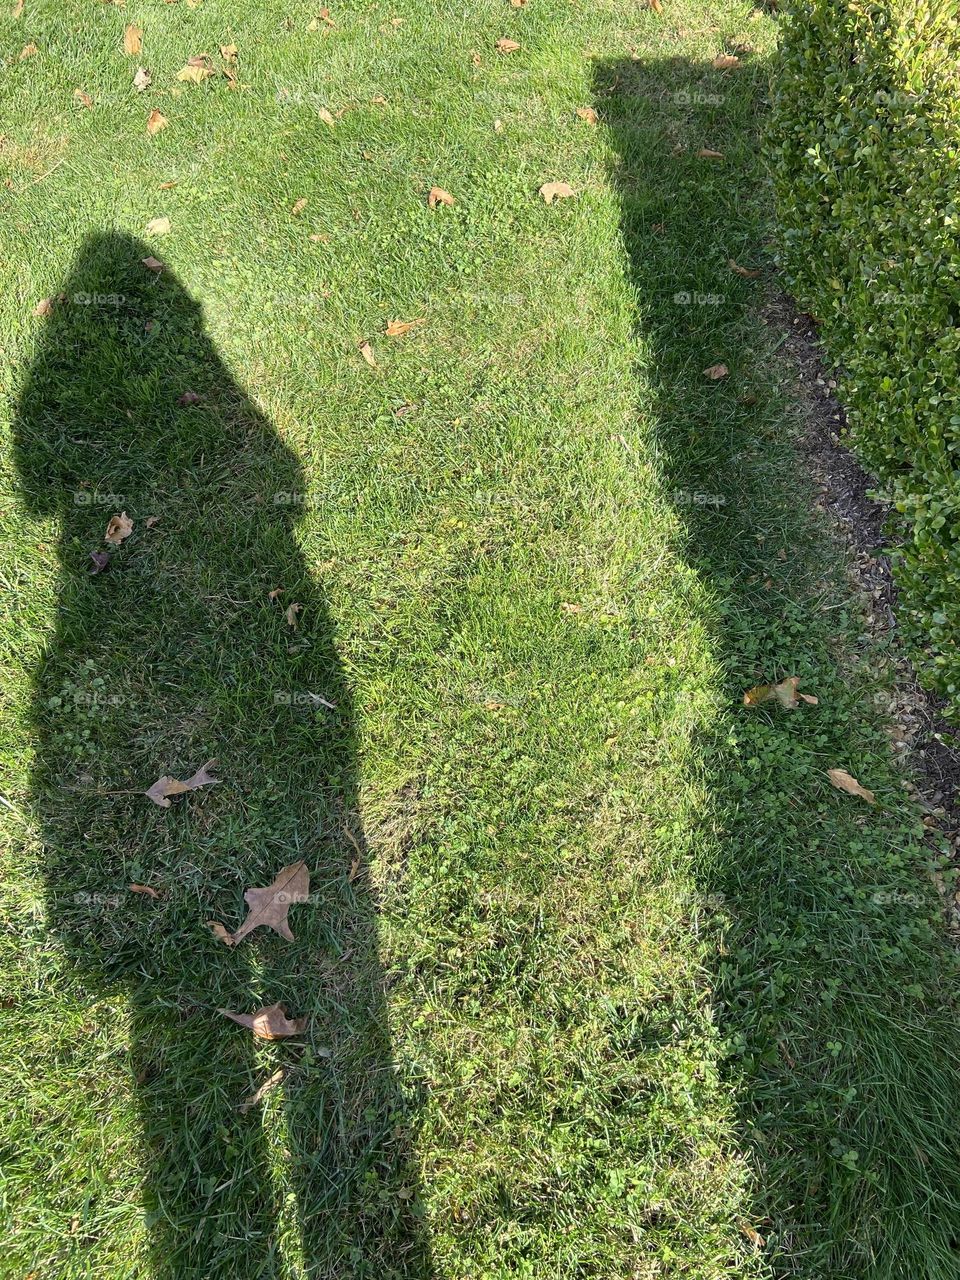 A shadow of a person (Me) on the grass next to the shadow of a hedge. 